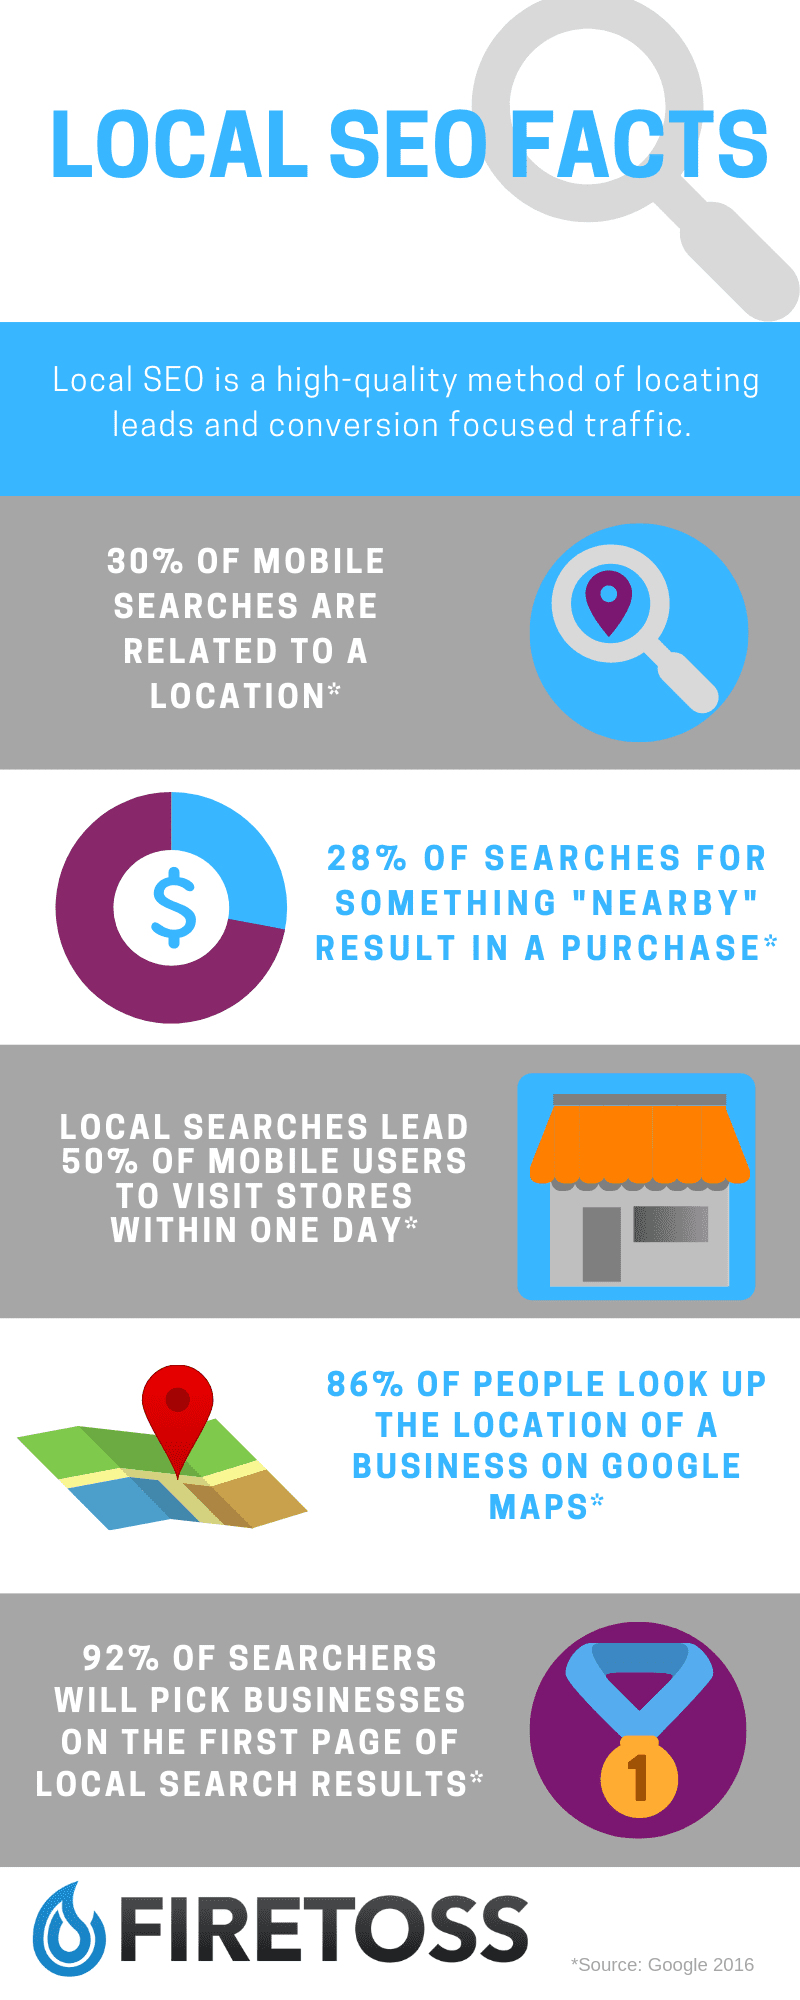 Local SEO guide facts infographic